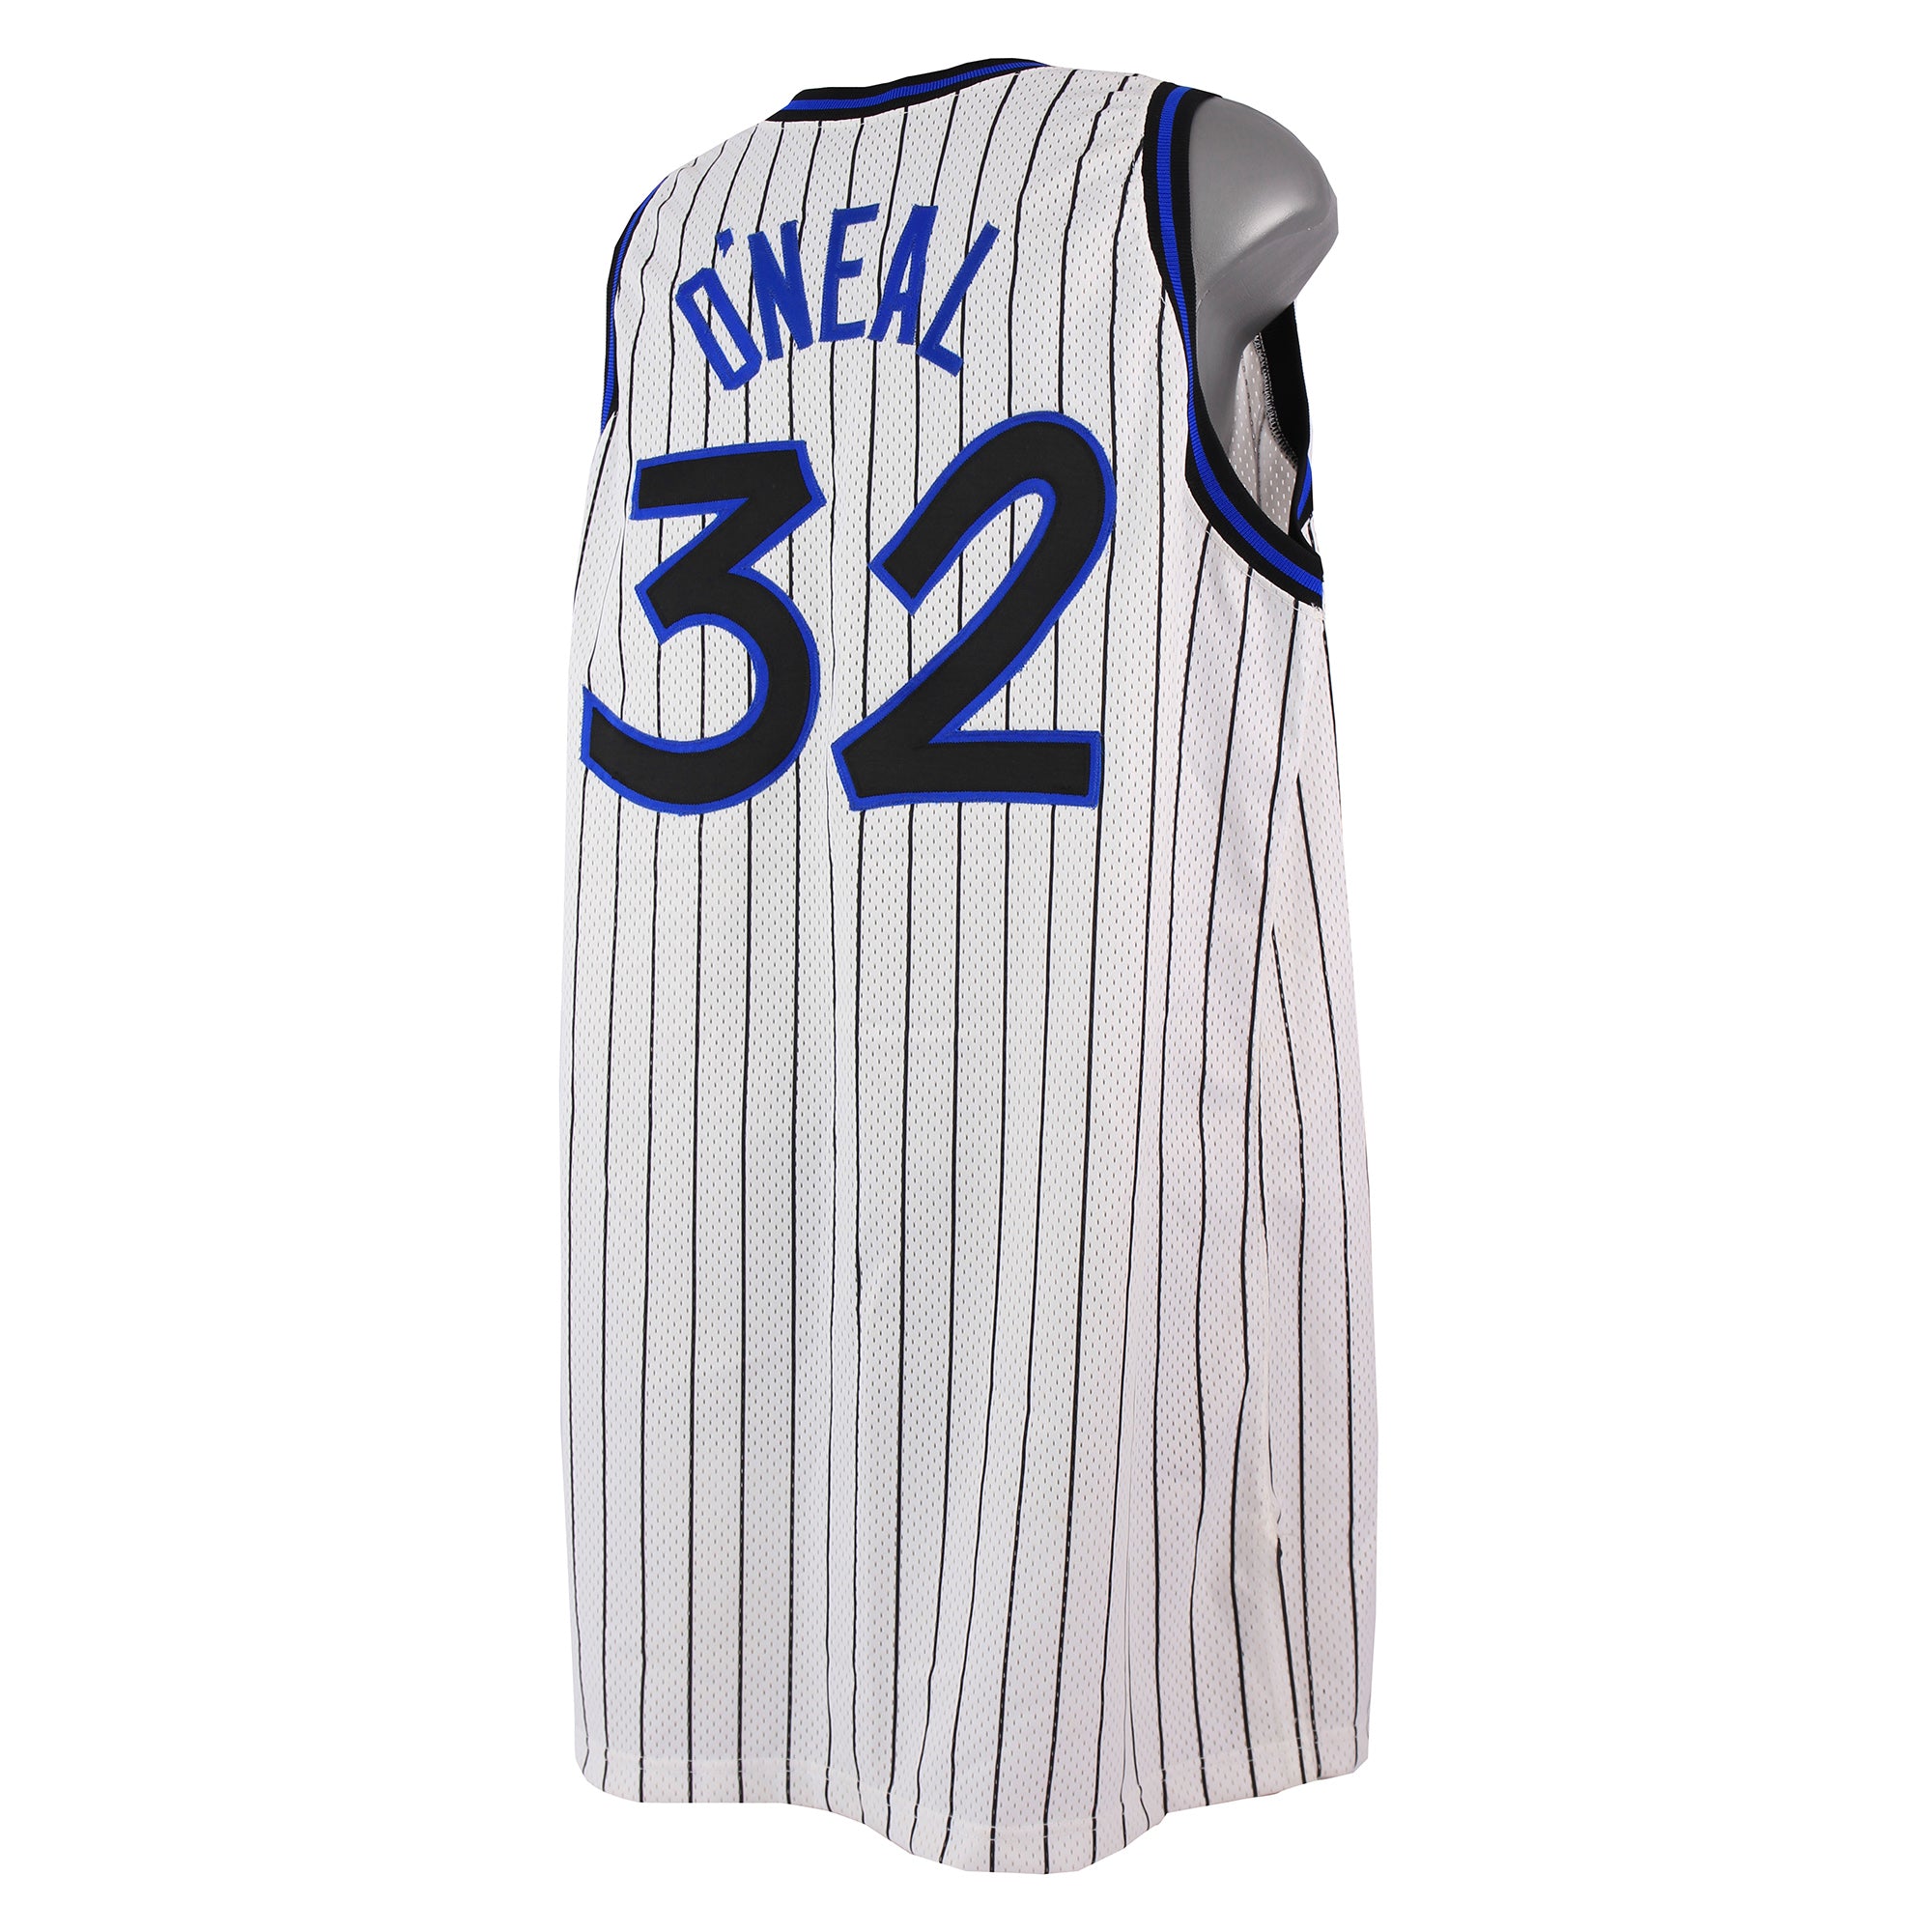 Shaquille O'Neal 1994-95 Game Worn Jersey